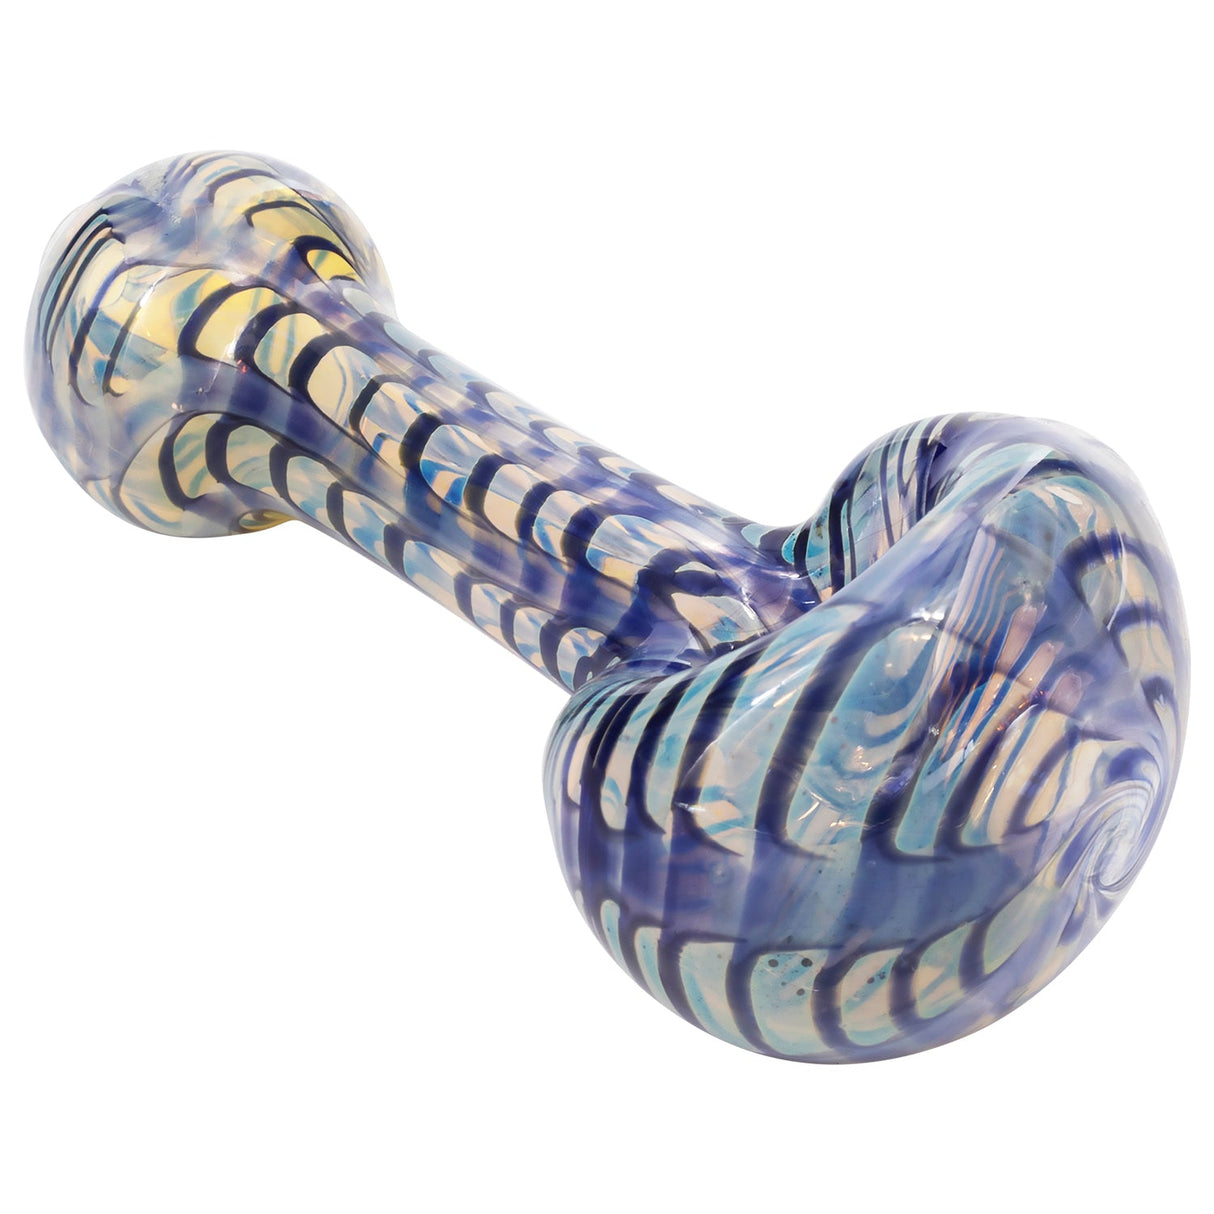 LA Pipes Candy Swirl Glass Spoon Pipe, Compact Design, Color Changing, Side View